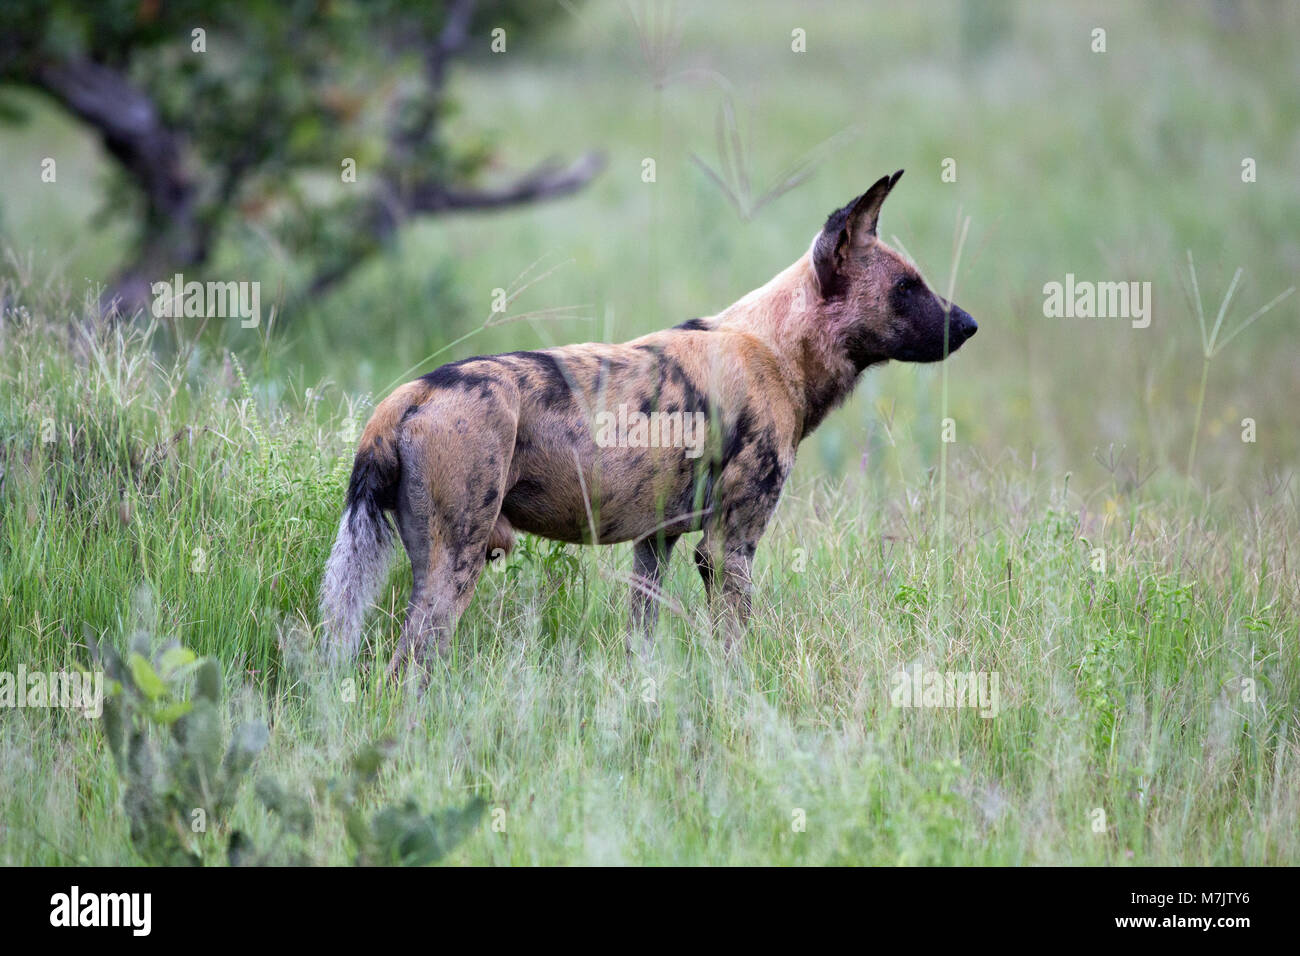 African Hunting Dog, o africano cane selvatico africano o verniciato o cane lupo verniciata (Lycaon pictus). Foto Stock